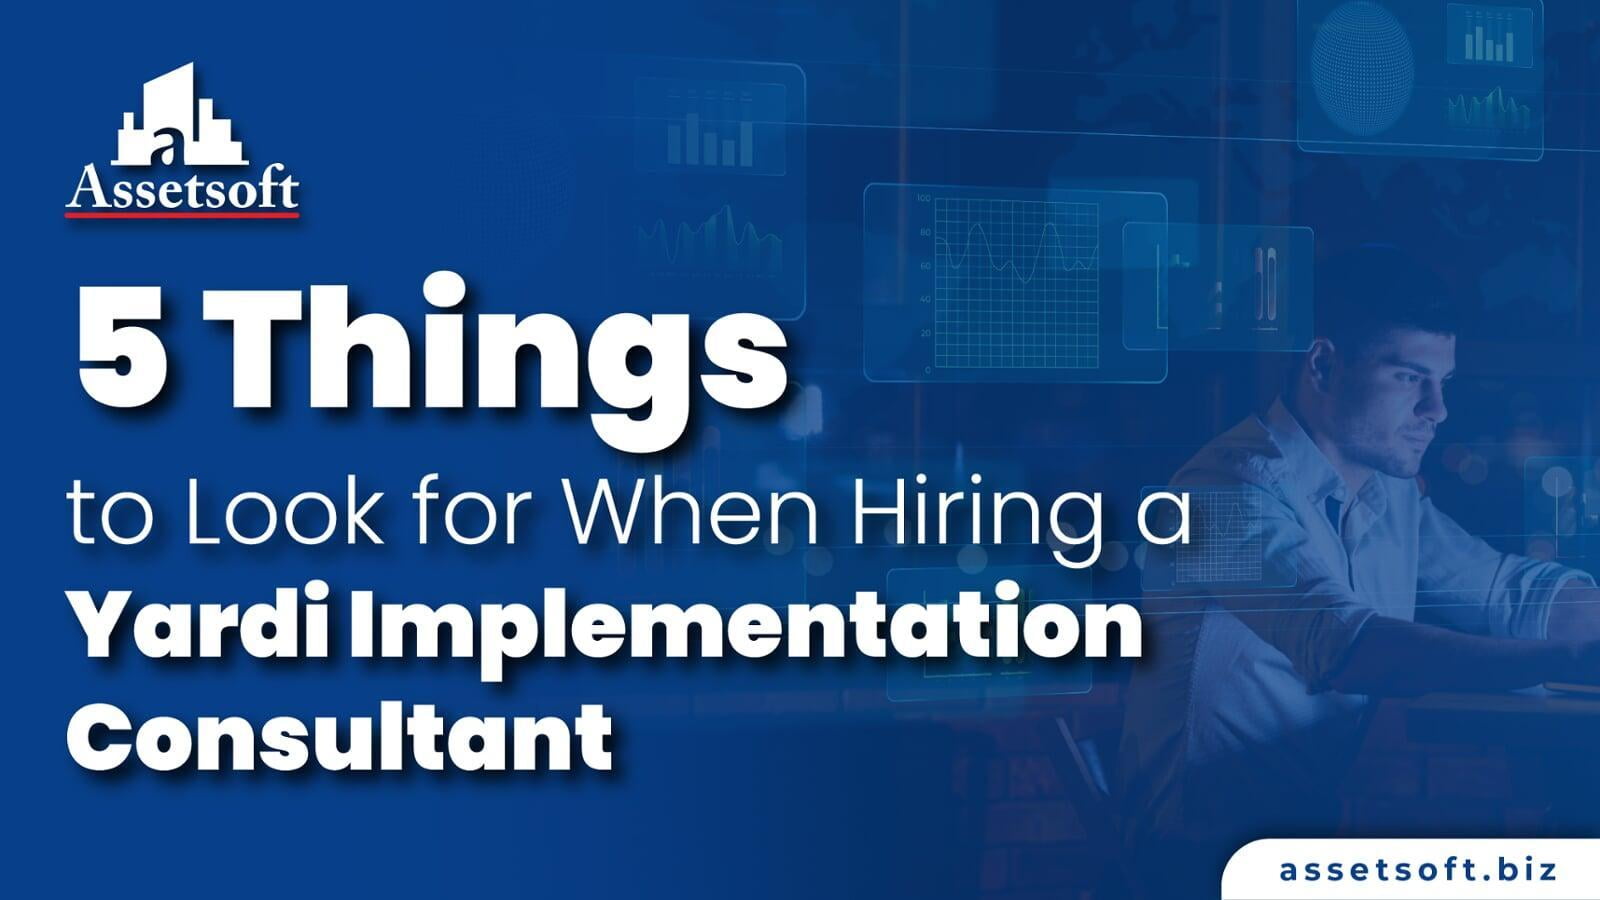 5 Things to Look for When Hiring a Yardi Implementation Consultant 